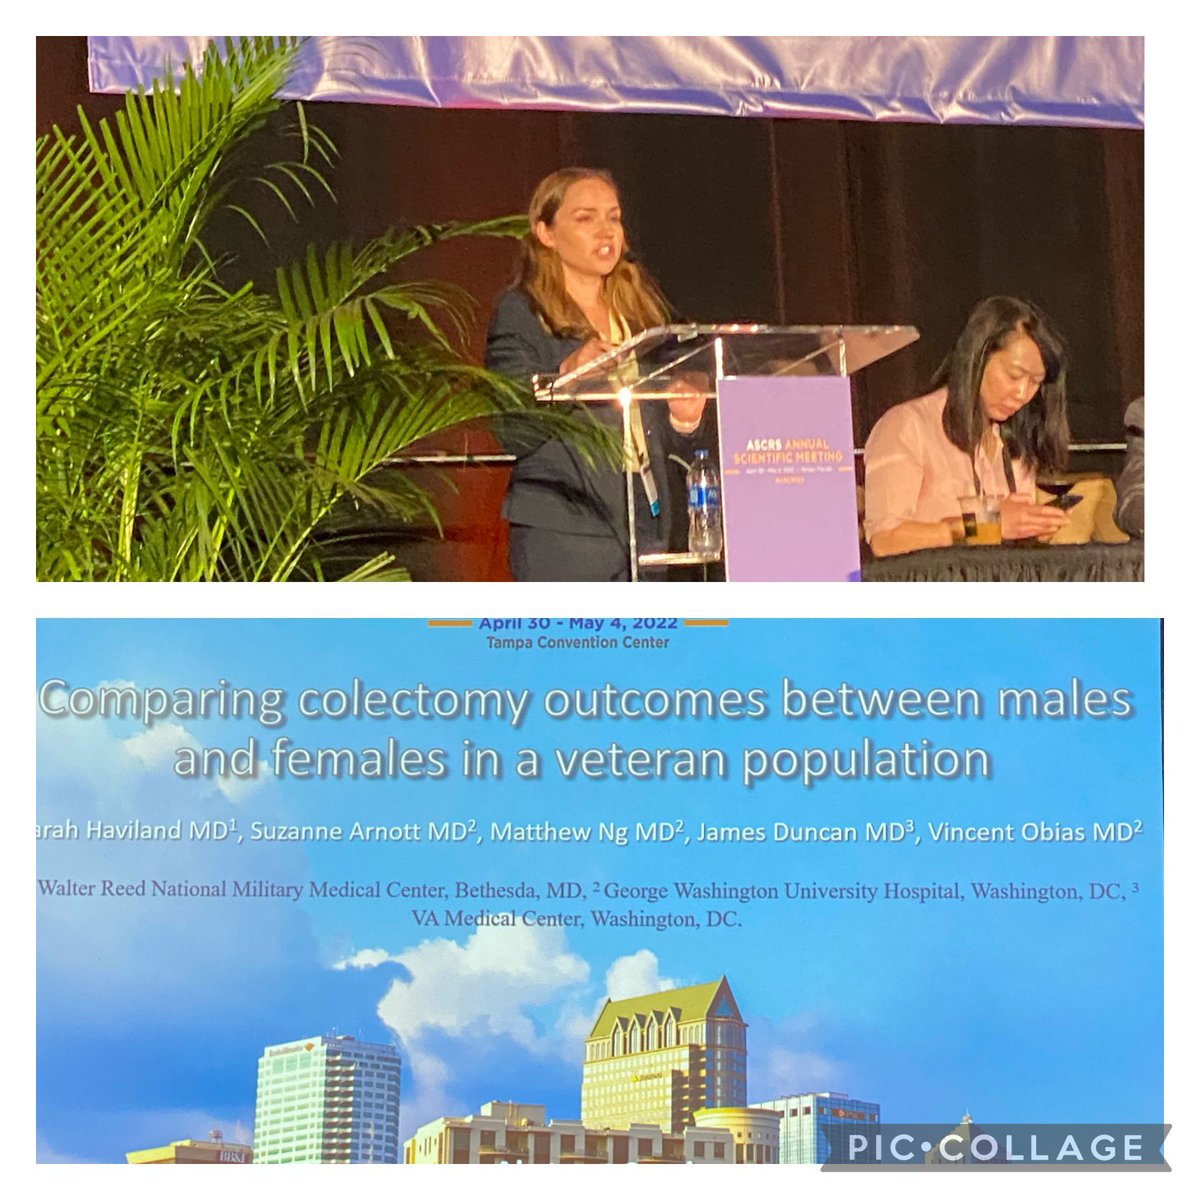 Wonderful talk by @SarahHaviland2 on Any differences in Colectomy outcomes in men vs women in the VA population. News alert- women are treated as good, if not better, in the VA system!! @ASCRS_1 #ASCRS22 @GWHospital @USUWR_GenSurg